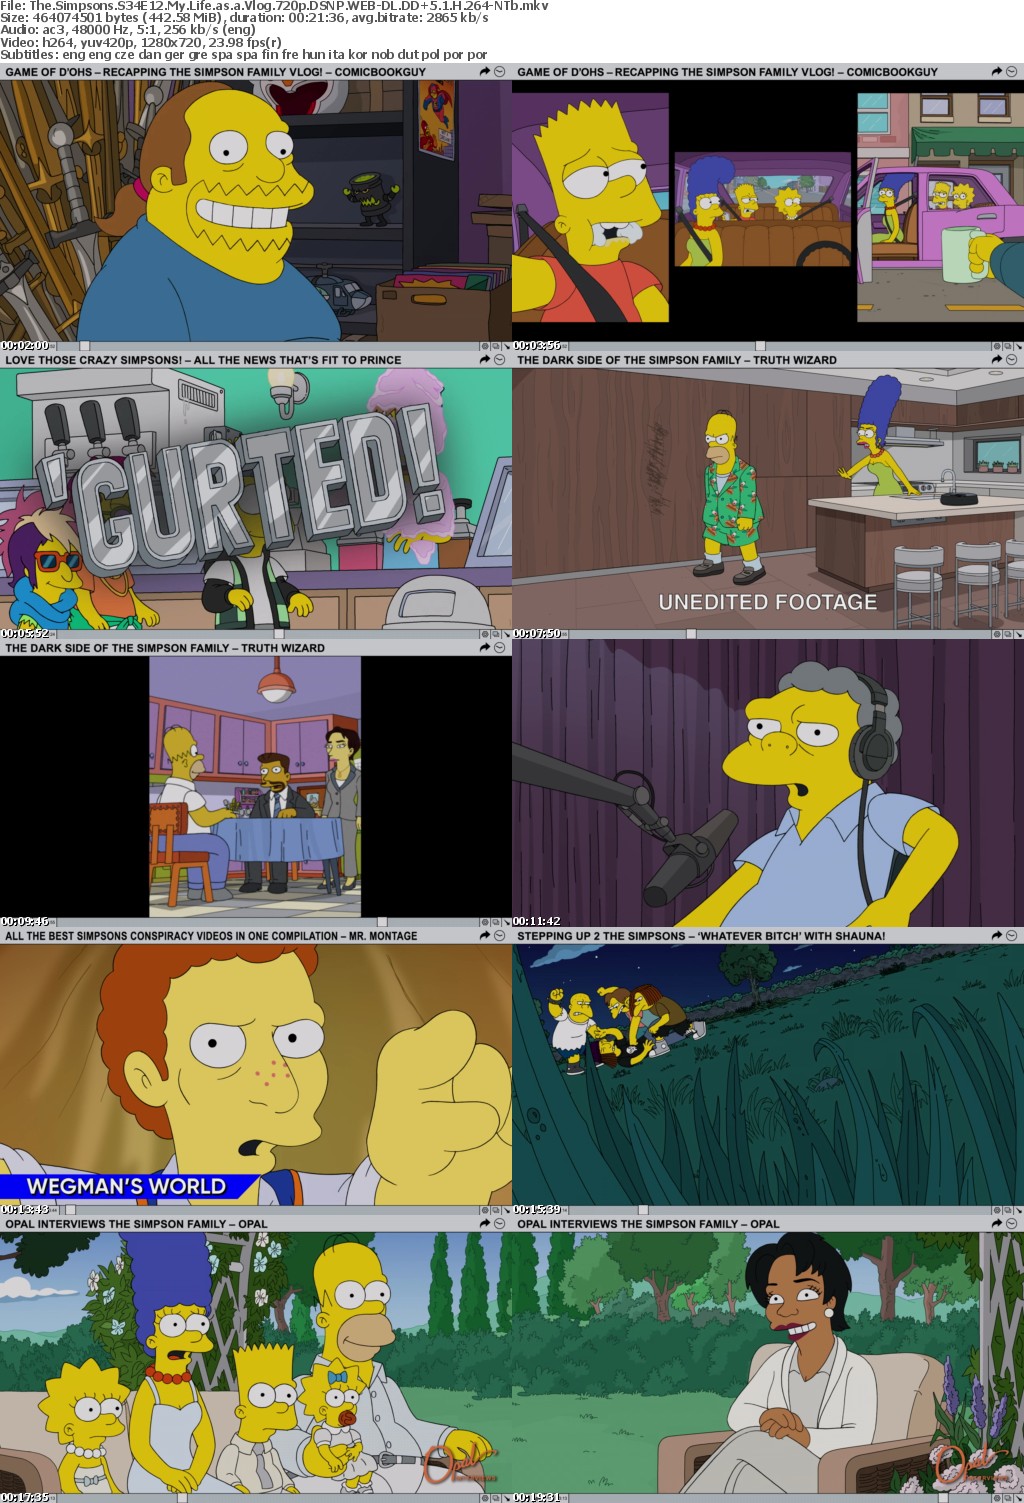 The Simpsons S34E12 My Life as a Vlog 720p DSNP WEBRip DDP5 1 x264-NTb